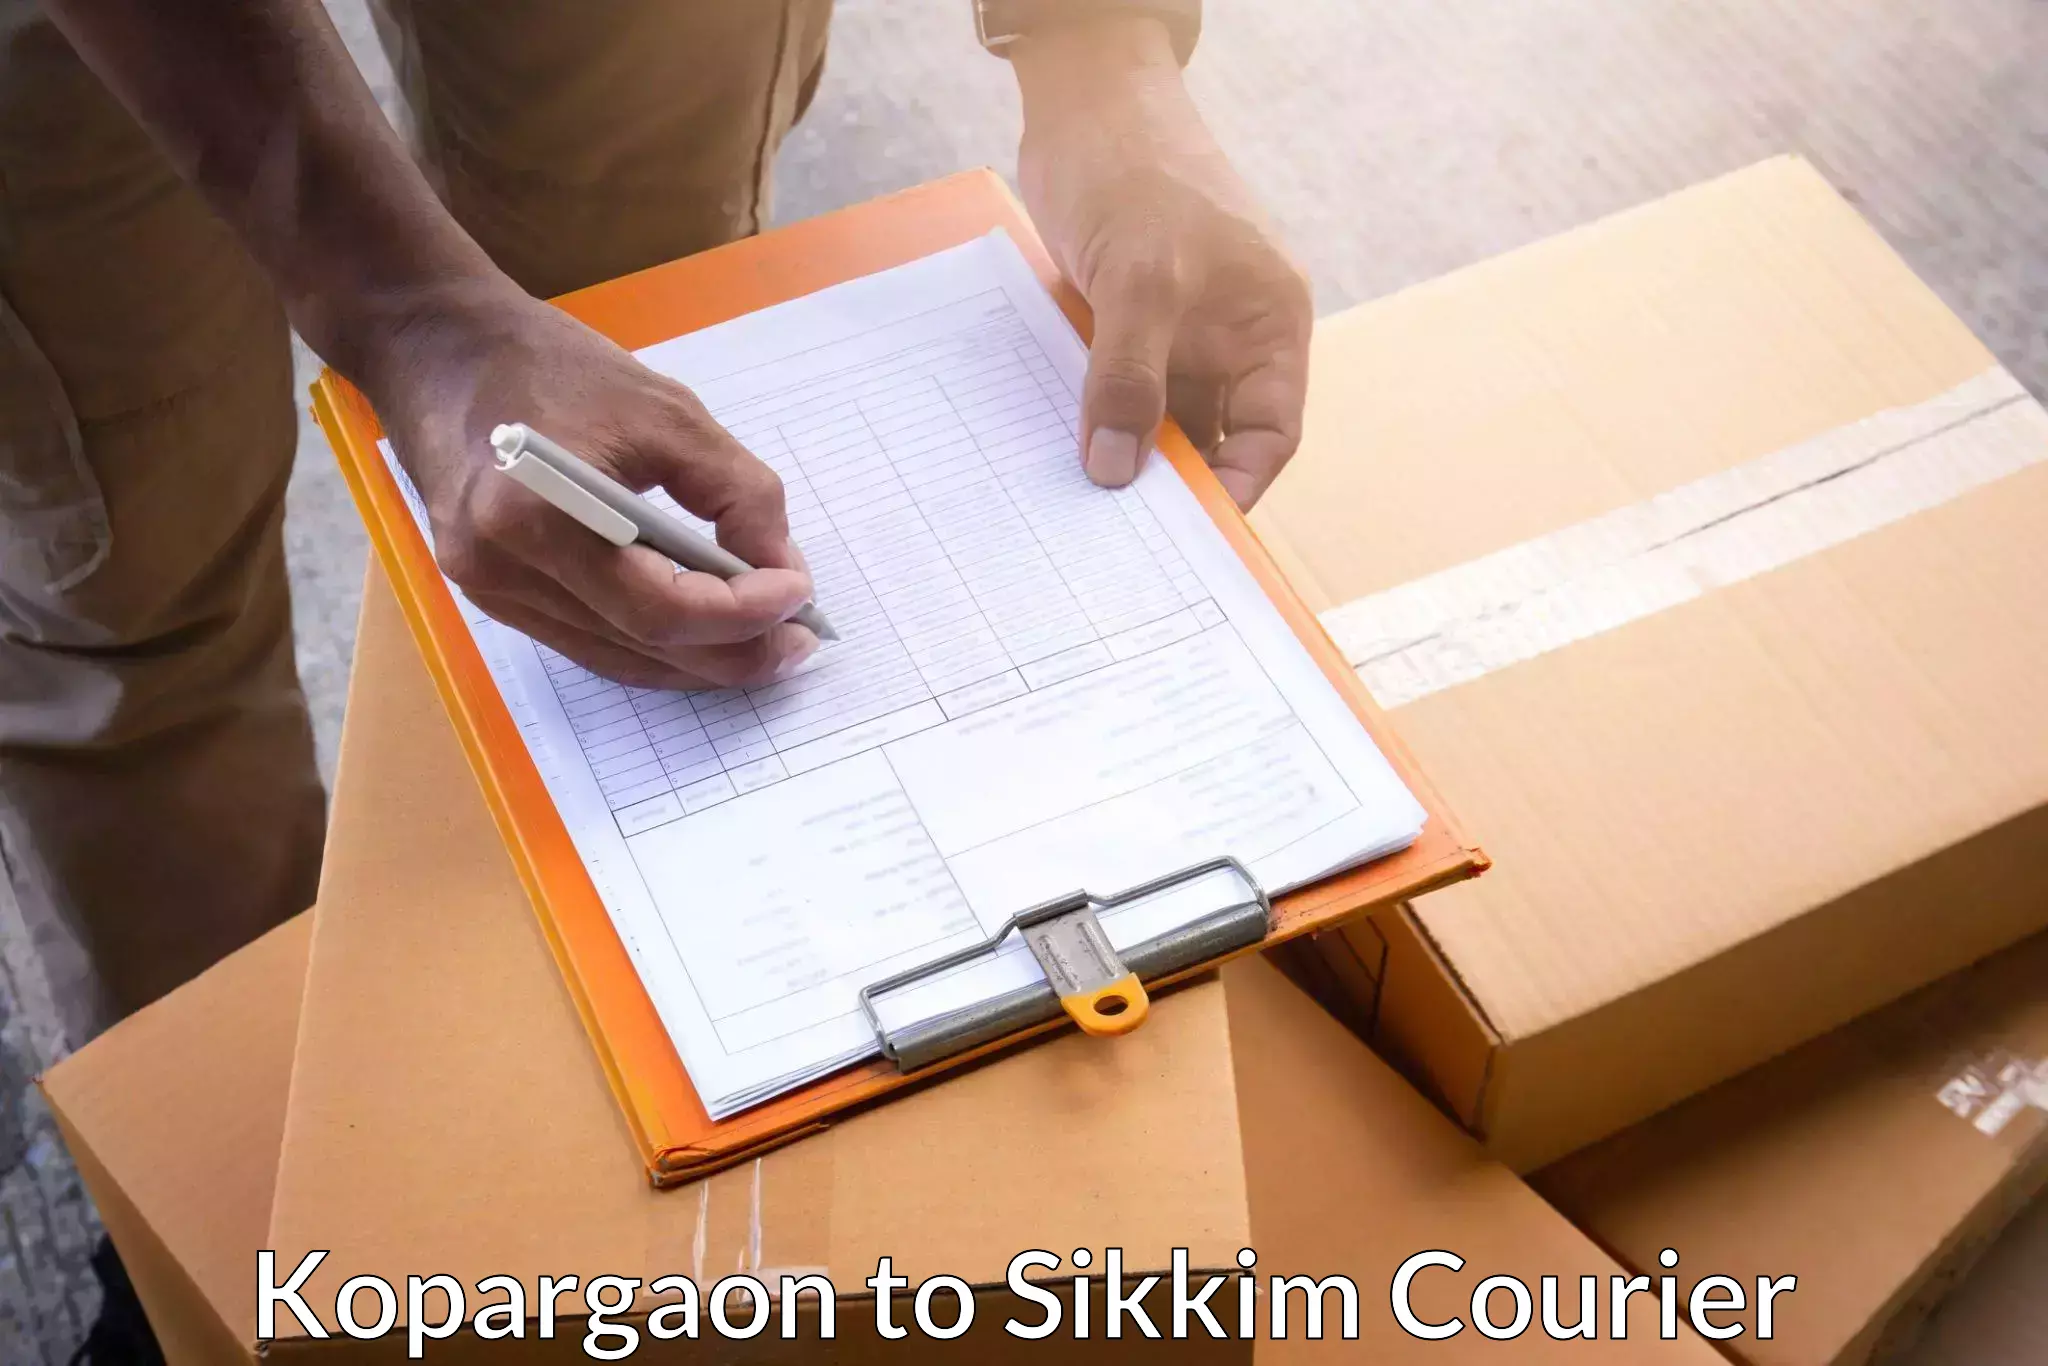 Advanced shipping network Kopargaon to West Sikkim